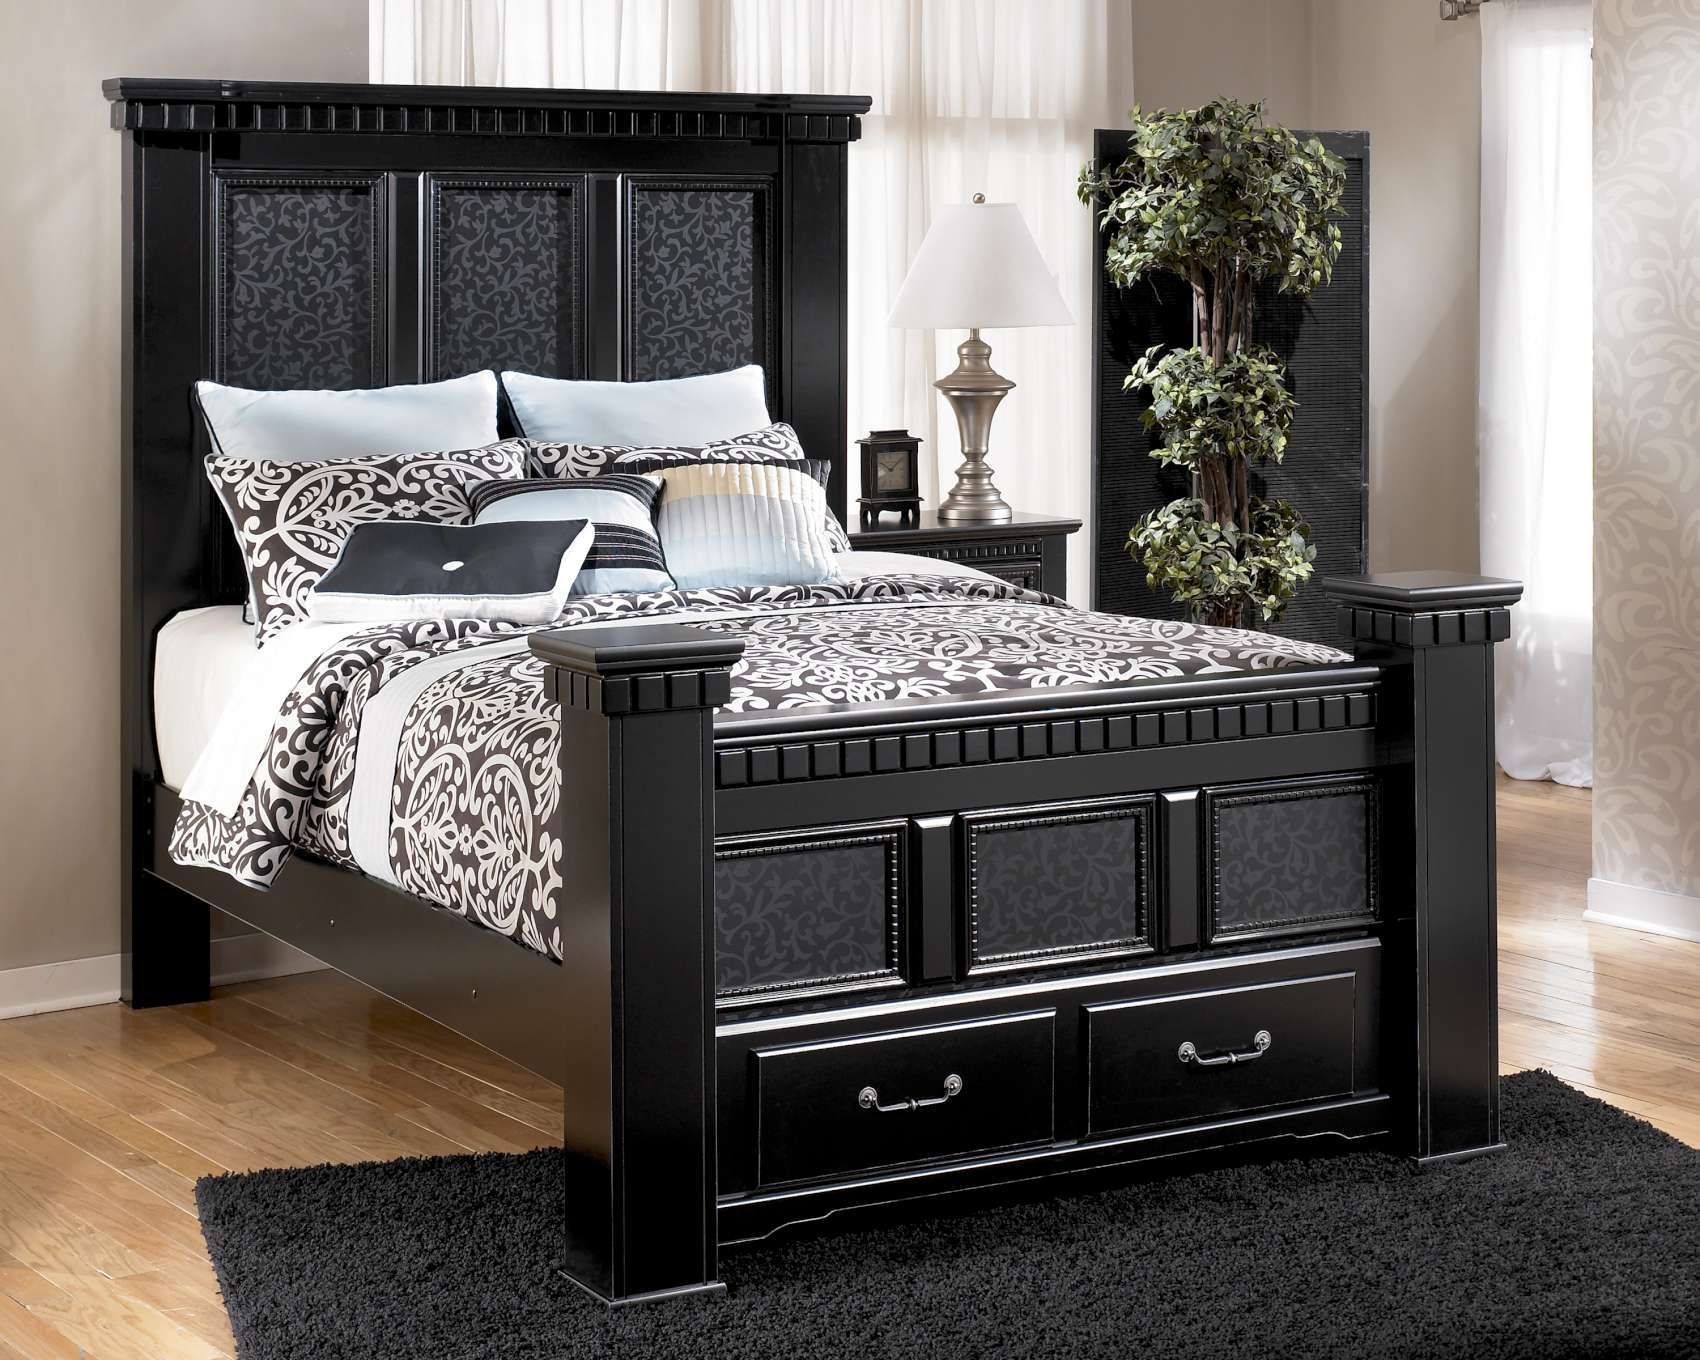 Cavallino Black Bedroom Collectionb291 pertaining to dimensions 1700 X 1360